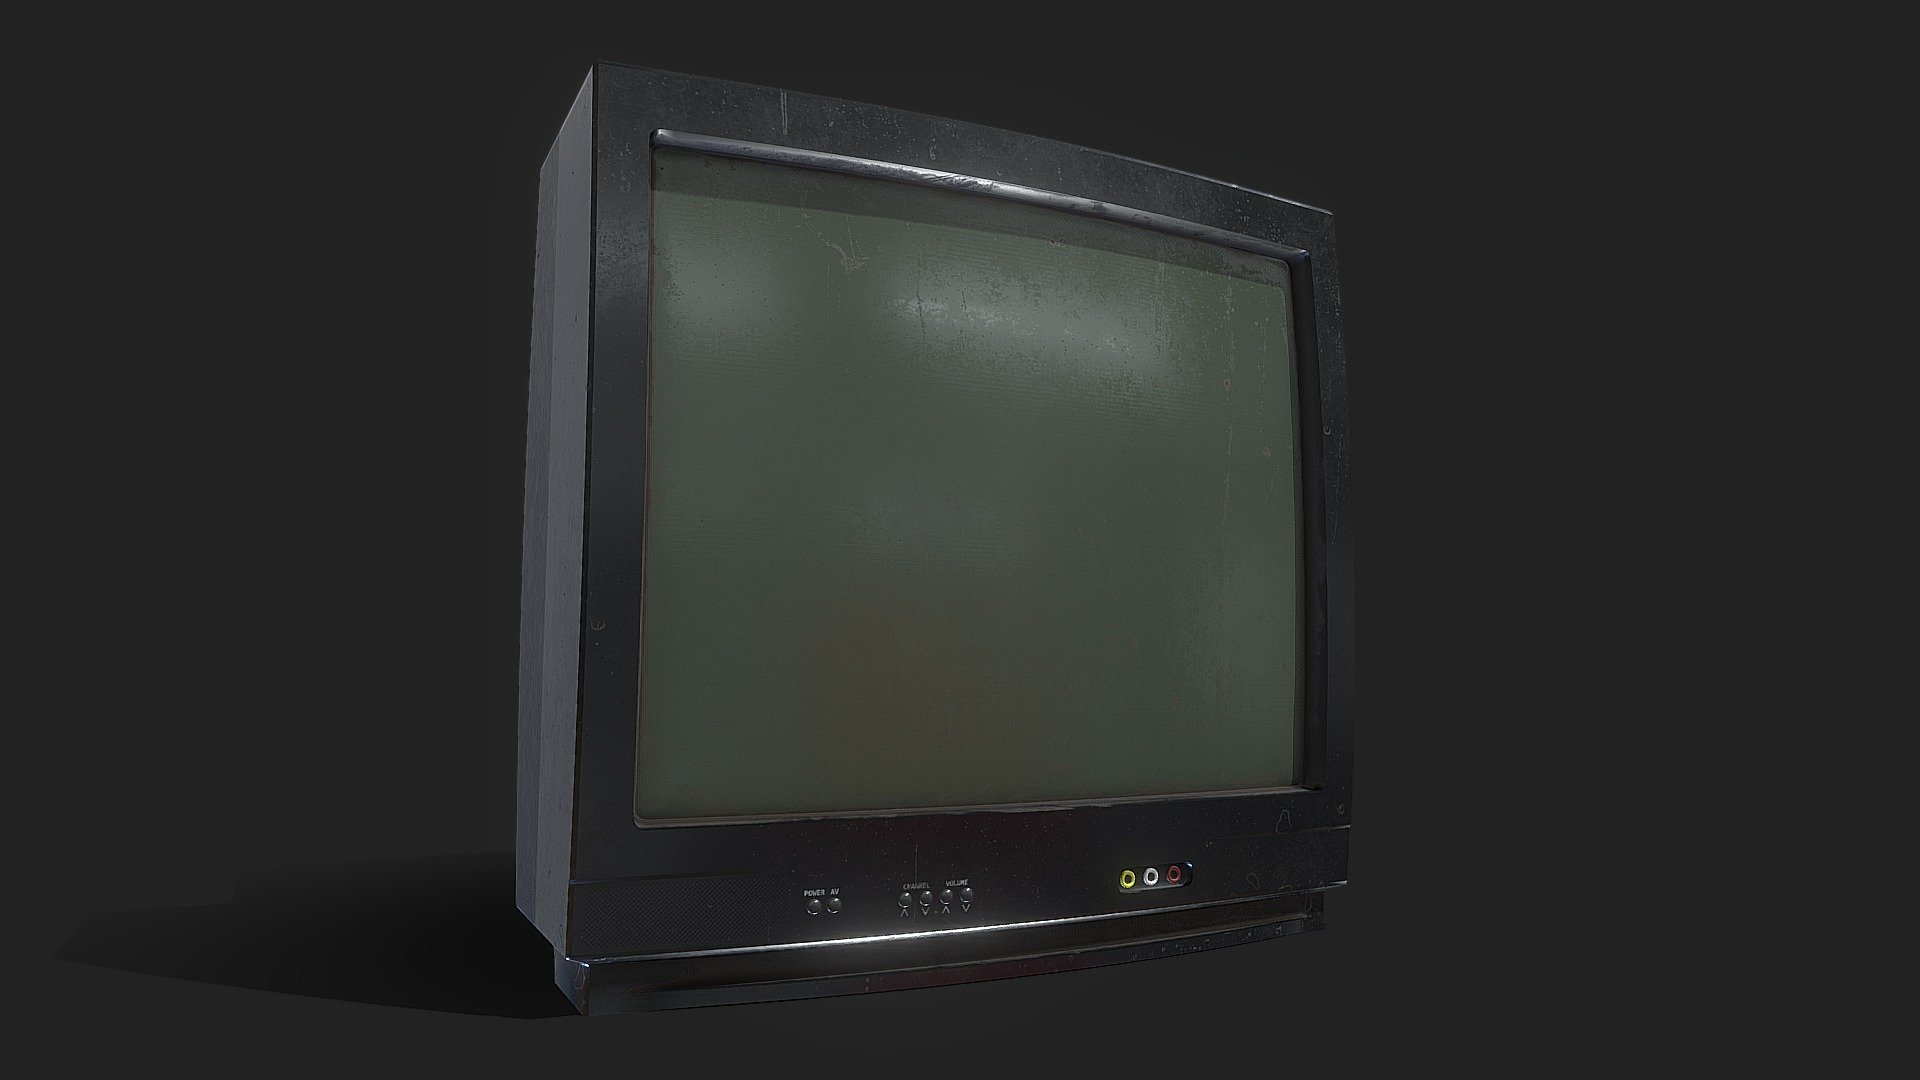 Screen in separate material for use of images or videos

2 materials with 2048x2048 textures packs (PBR Metal Rough, Unity HDRP, Unity Standard Metallic and UE4):

PBR Metal Rough- BaseColor, AO, Height, Normal, Roughness and Metallic;

Unity HDRP: BaseColor, MaskMap, Normal;

Unity Standard Metallic: AlbedoTransparency, MetallicSmoothness, Normal;

Unreal Engine 4: BaseColor, Normal, OcclusionRoughnessMetallic;

The package also has the .fbx, .obj, .dae and .blend file 3d model